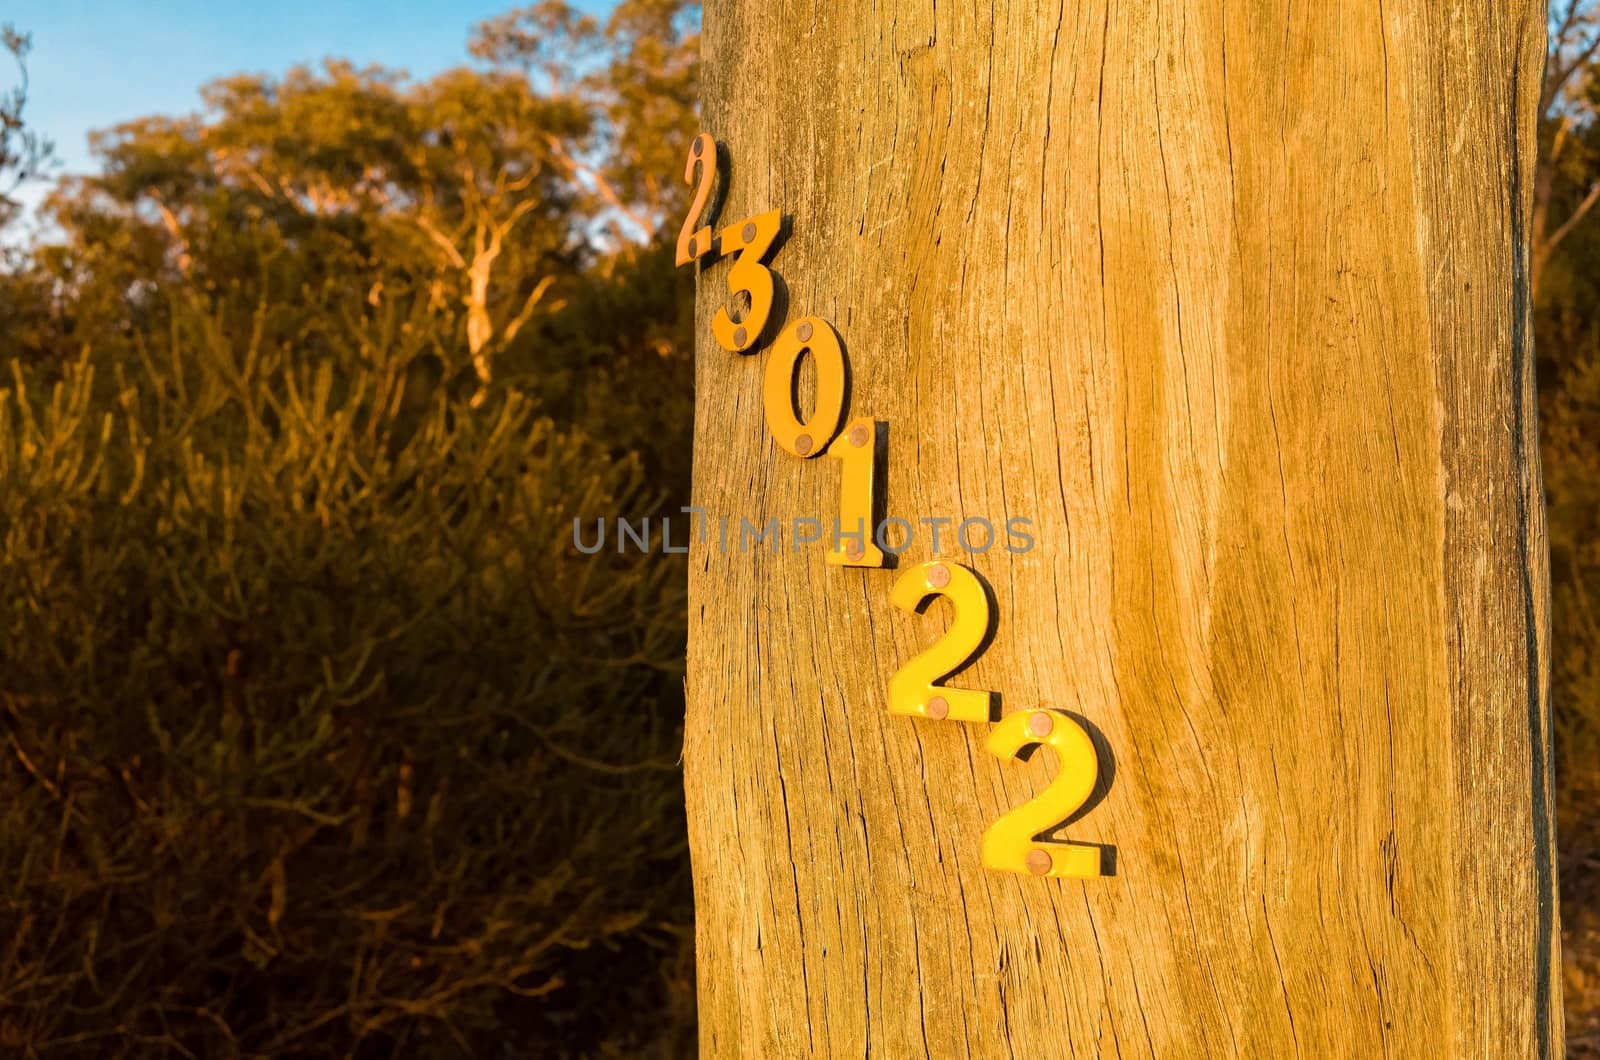 Telephone pole numbers in sunset by jaaske